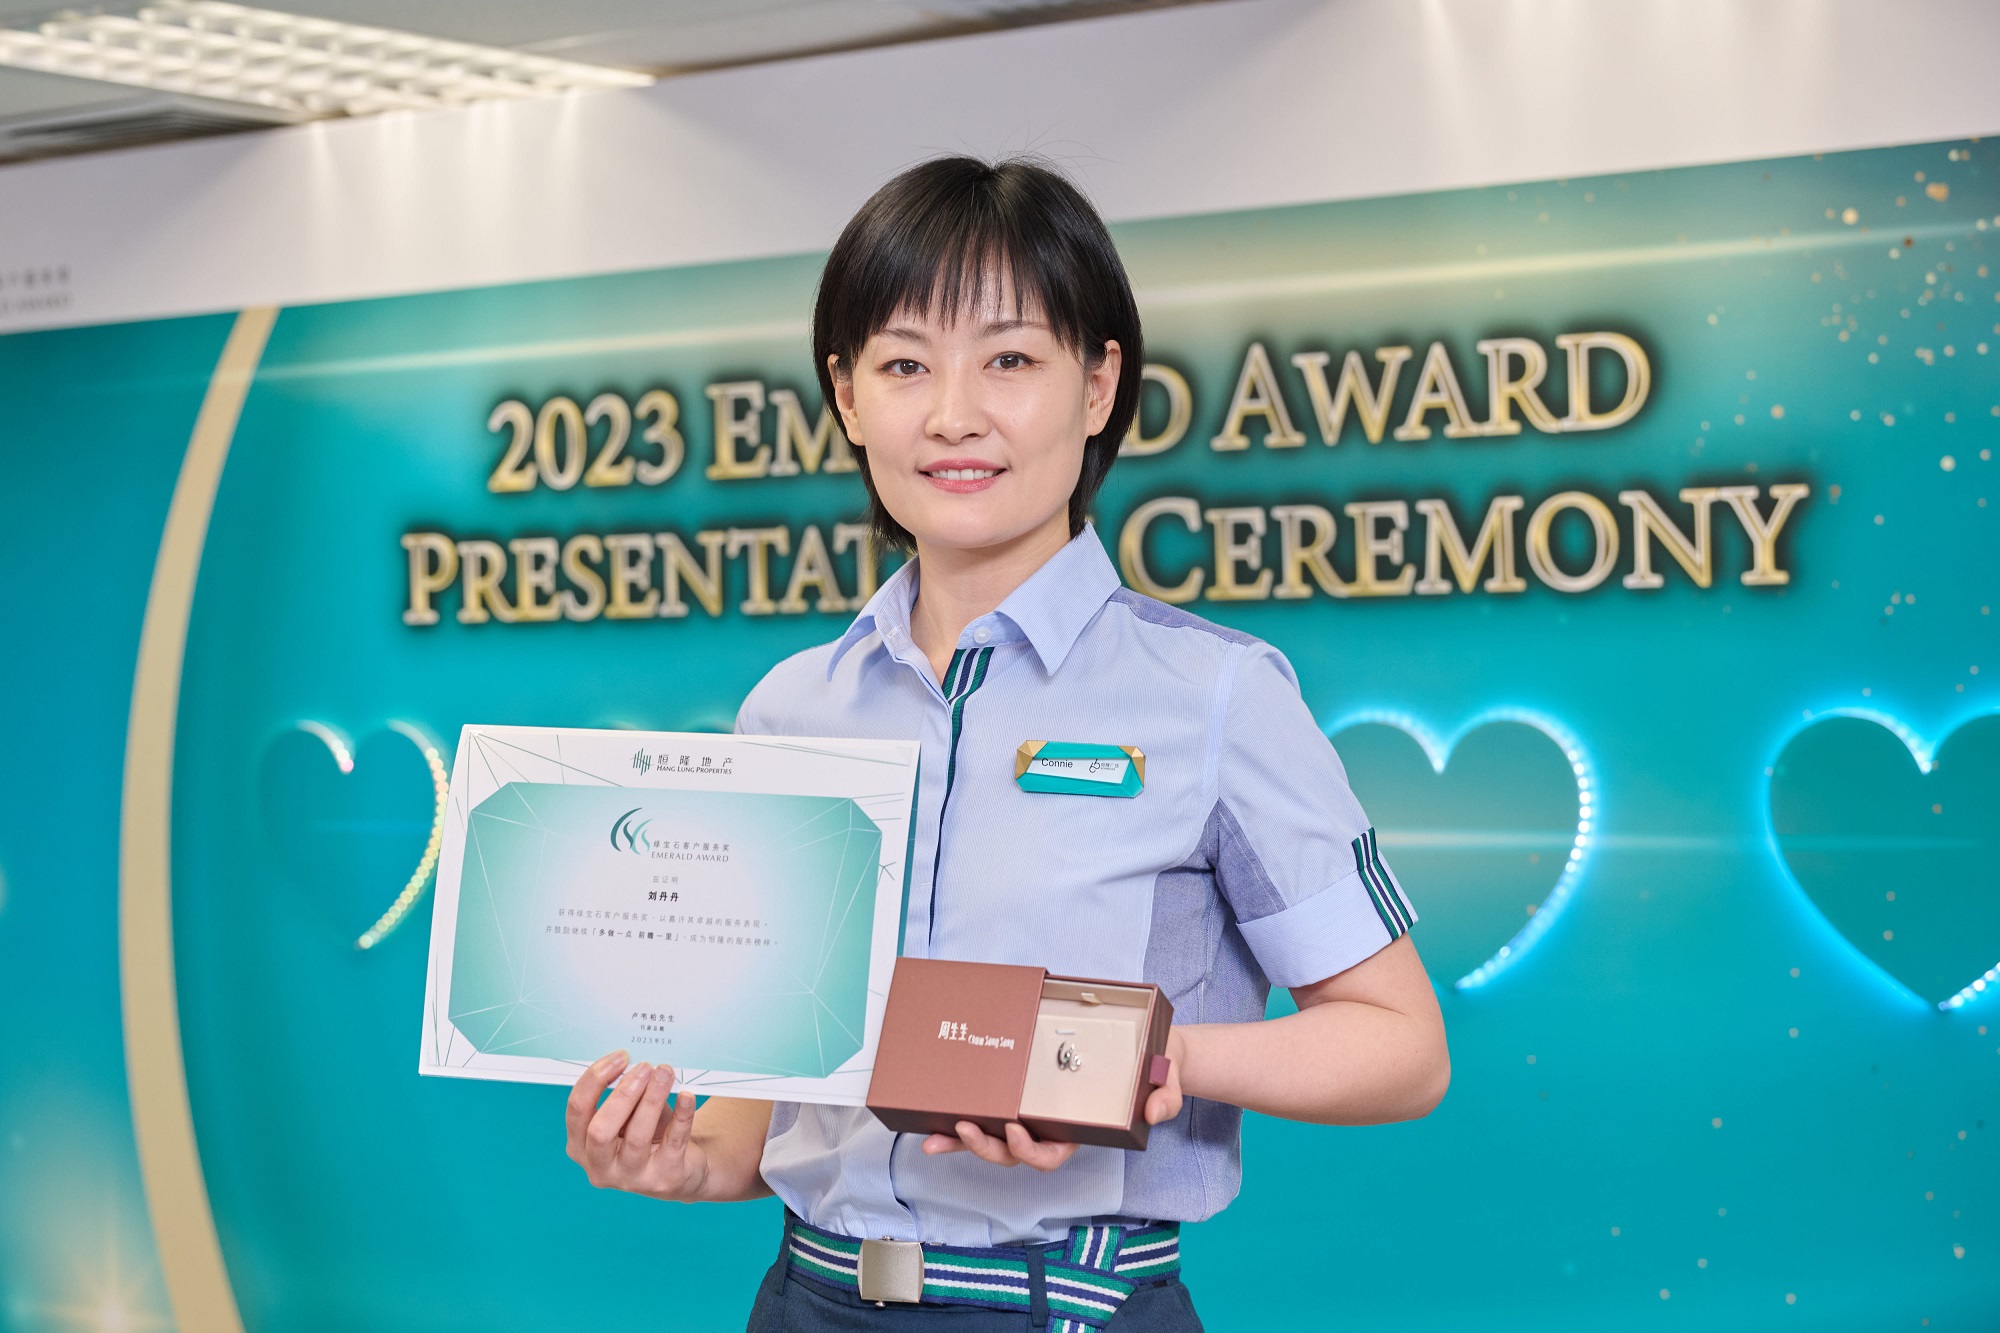 Connie Liu from Riverside 66, Tianjin is awarded the Hang Lung Emerald Award for her exceptional dedication and sense of ownership. Her passion for work and initiative in self-enhancement reflect Hang Lung's commitment to customer-centricity